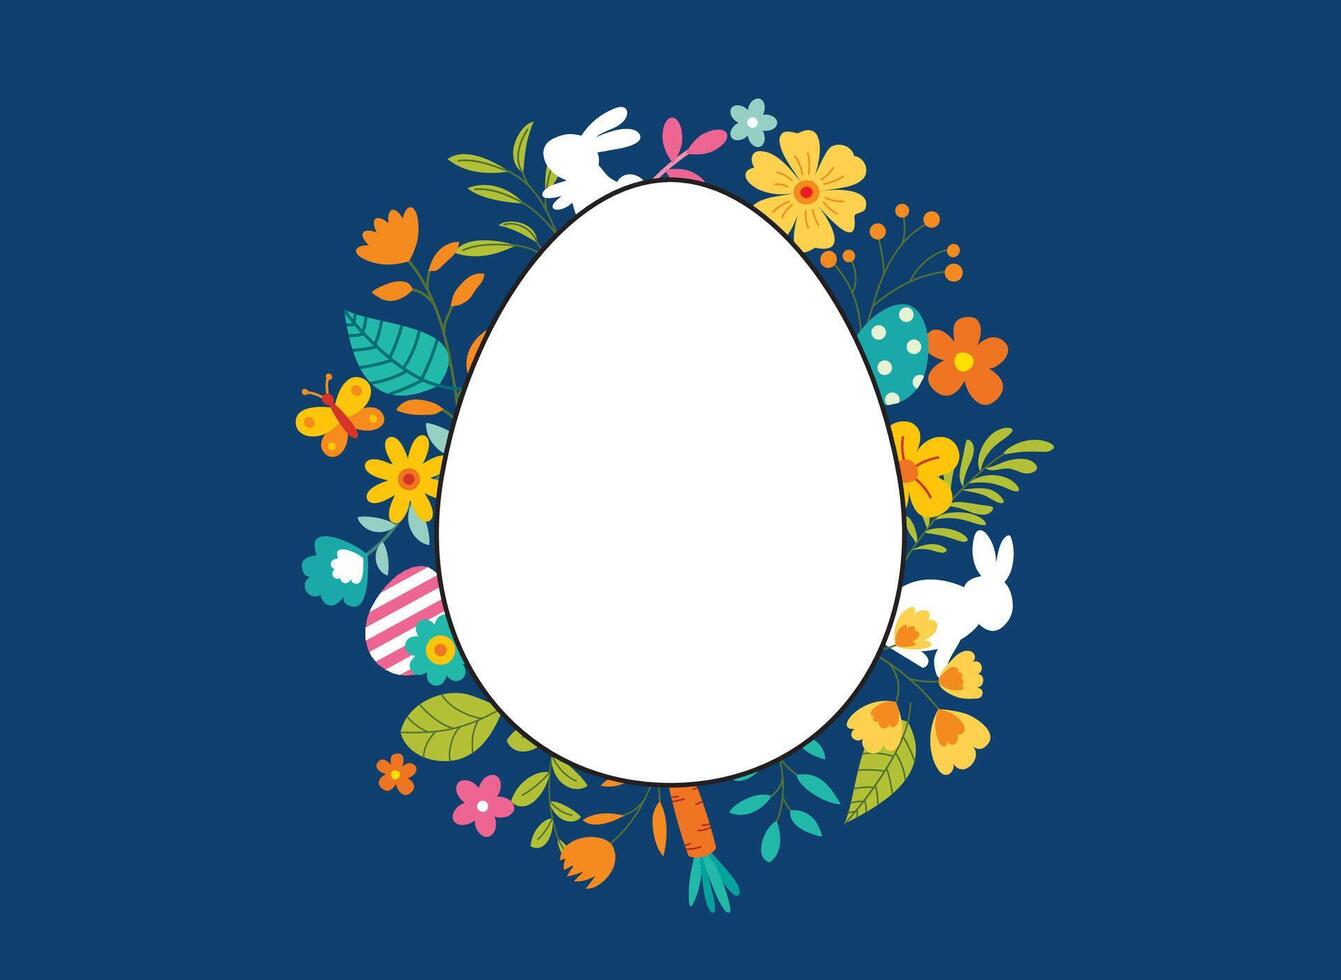 Happy easter egg greeting card background template.Can be used for cover, invitation, ad, wallpaper,flyers, posters, brochure. vector